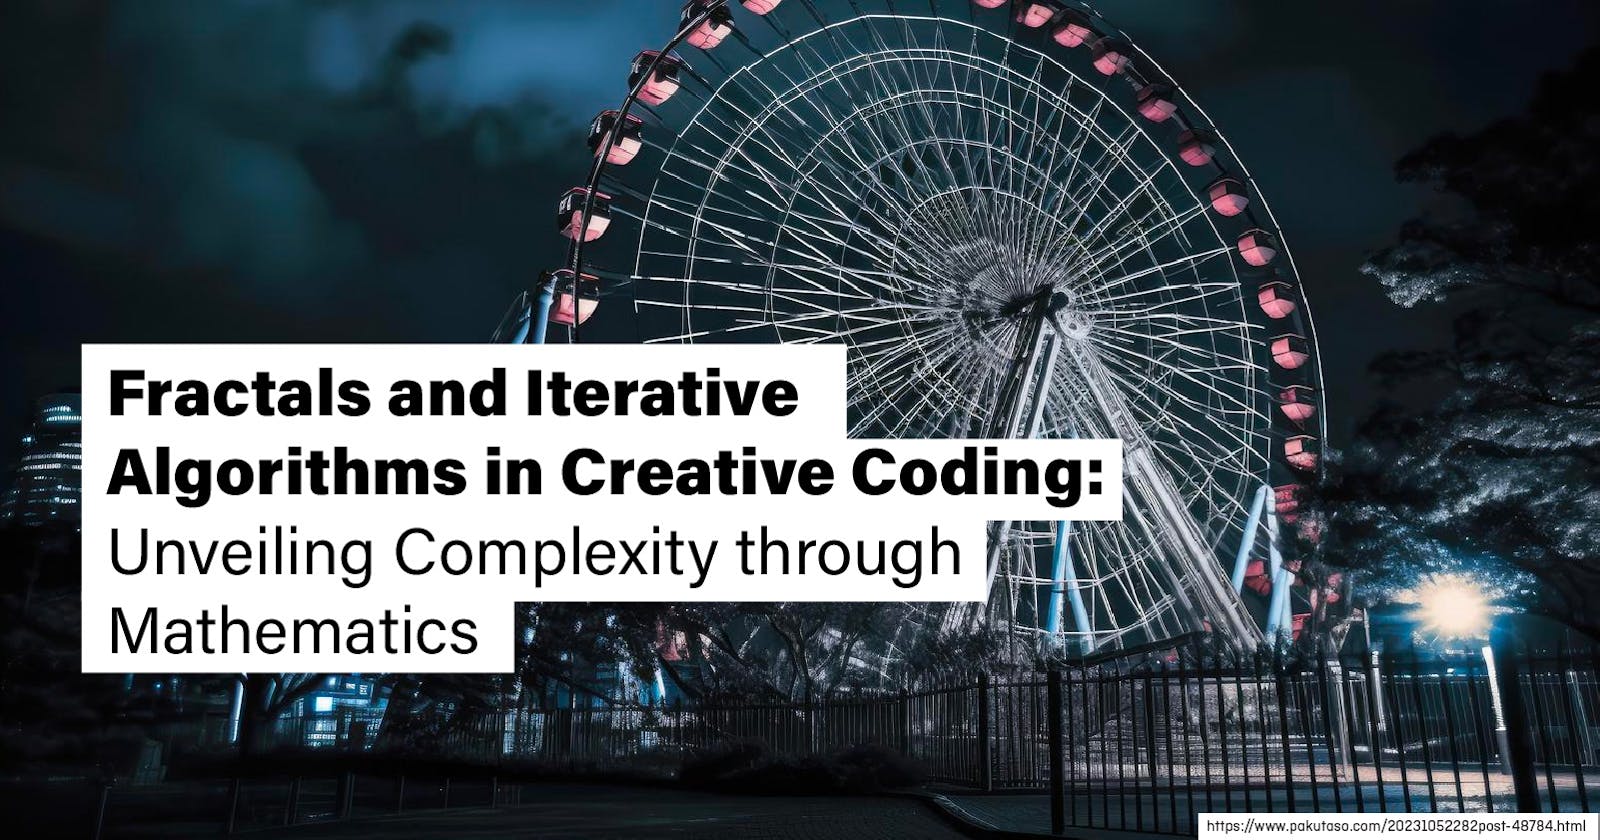 Fractals and Iterative Algorithms in Creative Coding: Unveiling Complexity through Mathematics